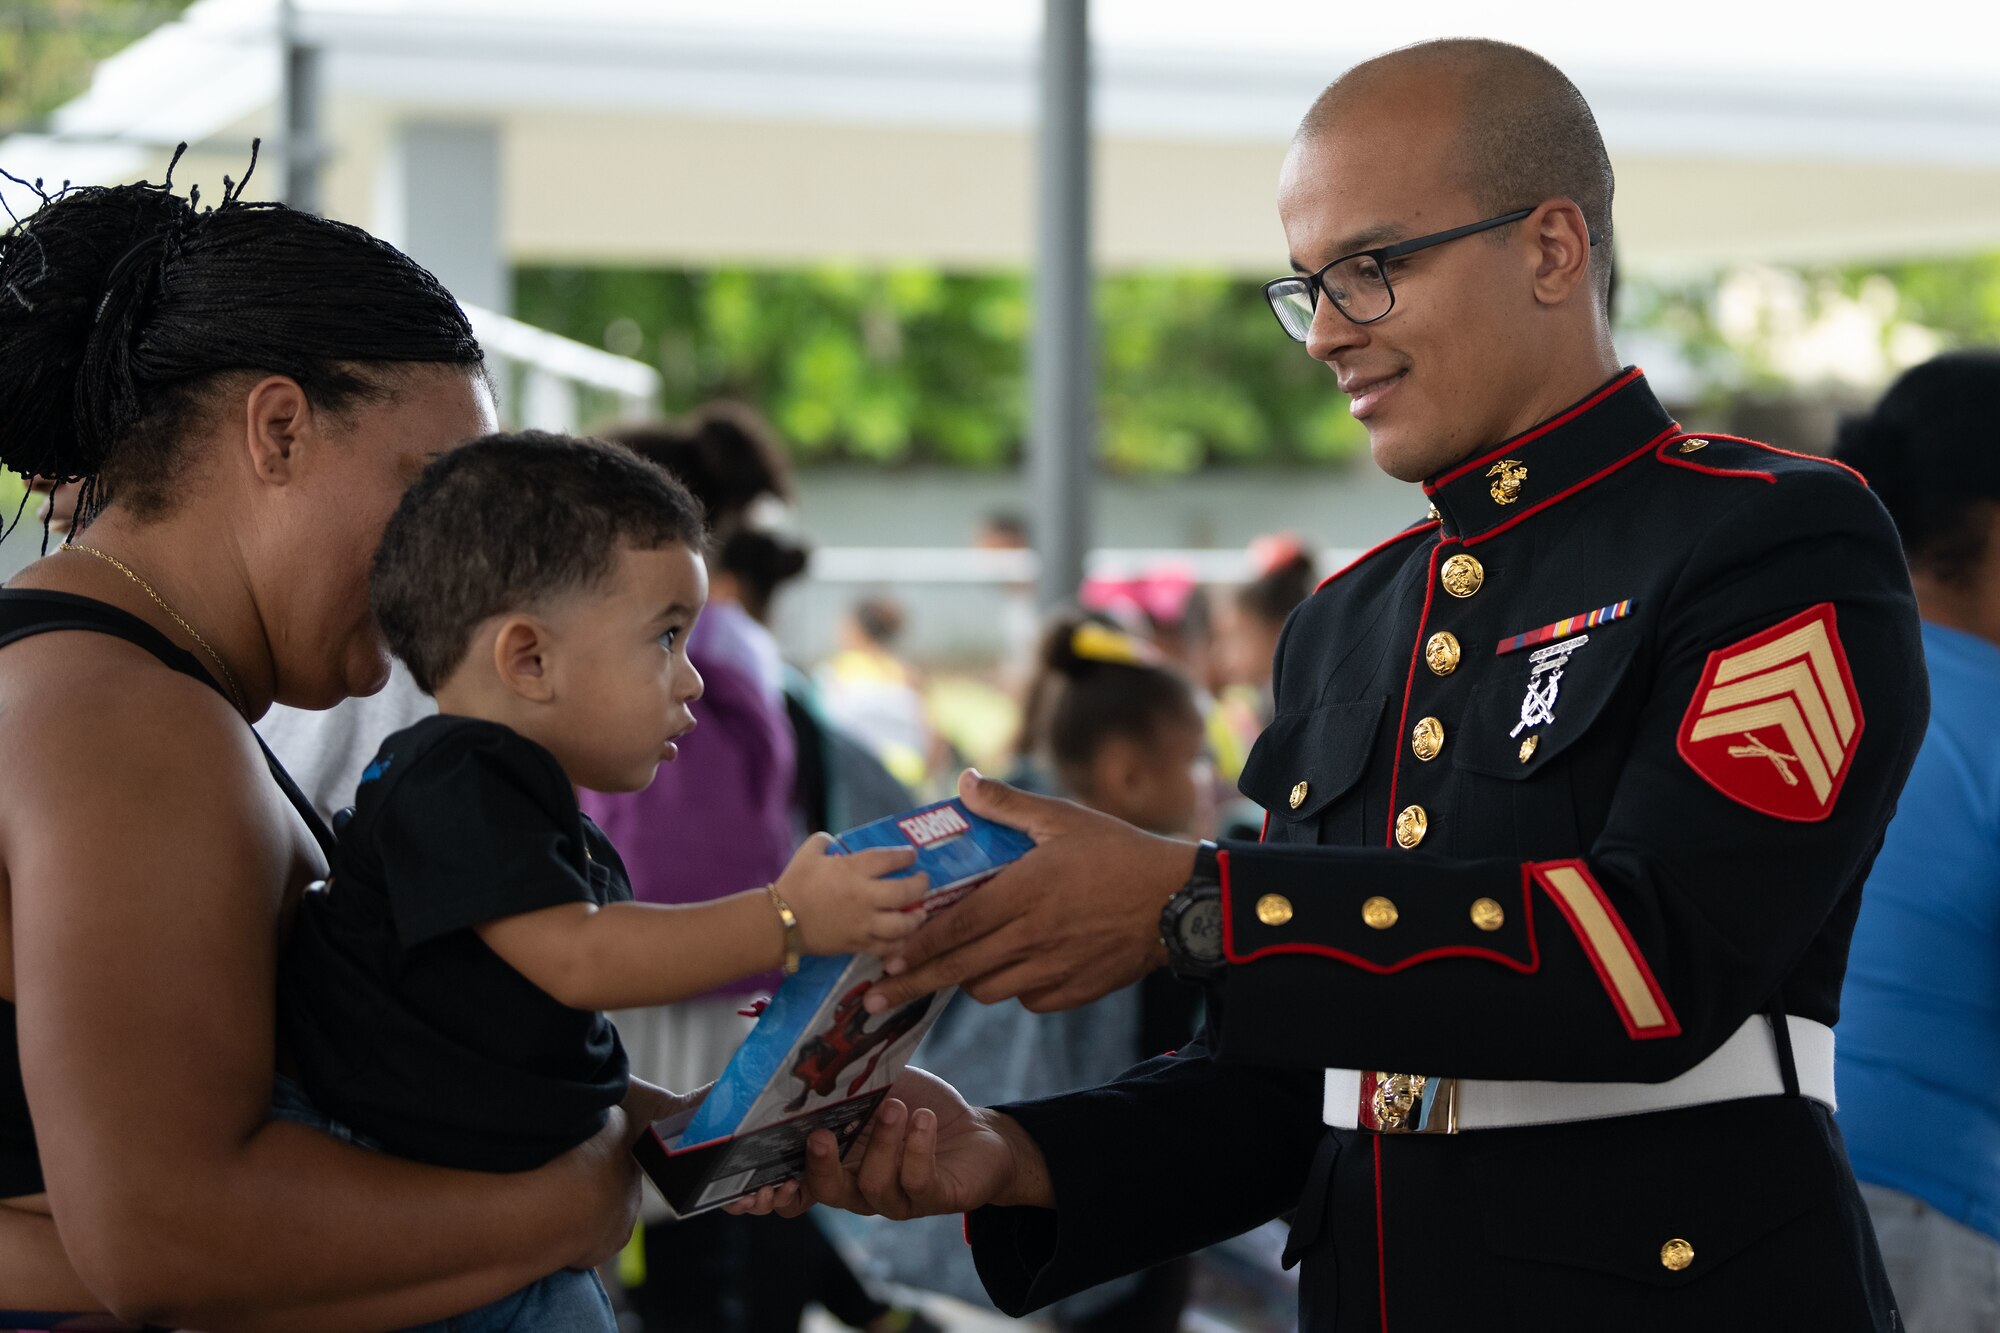 U.S. Marine Corps Sgt. Yadiel Burgos Benitez, a Toys for Tots coordinator, both assigned to Det. 1 Landing Support Company, Combat Logistics Regiment 45, 4th Marine Logistics Group, deliver toys to a child and his mother during a toy distribution at Dr. Julio Henna Elementary School, San Juan, Puerto Rico, Dec. 14, 2023. The event was part of the campaign with Toys for Tots, where Puerto Rico Air National Guard members partnered with Marines to distribute more than 200 toys to children at a local school. (U.S. Air National Guard photo by Airman 1st Class Gisselle Toro-Caraballo)